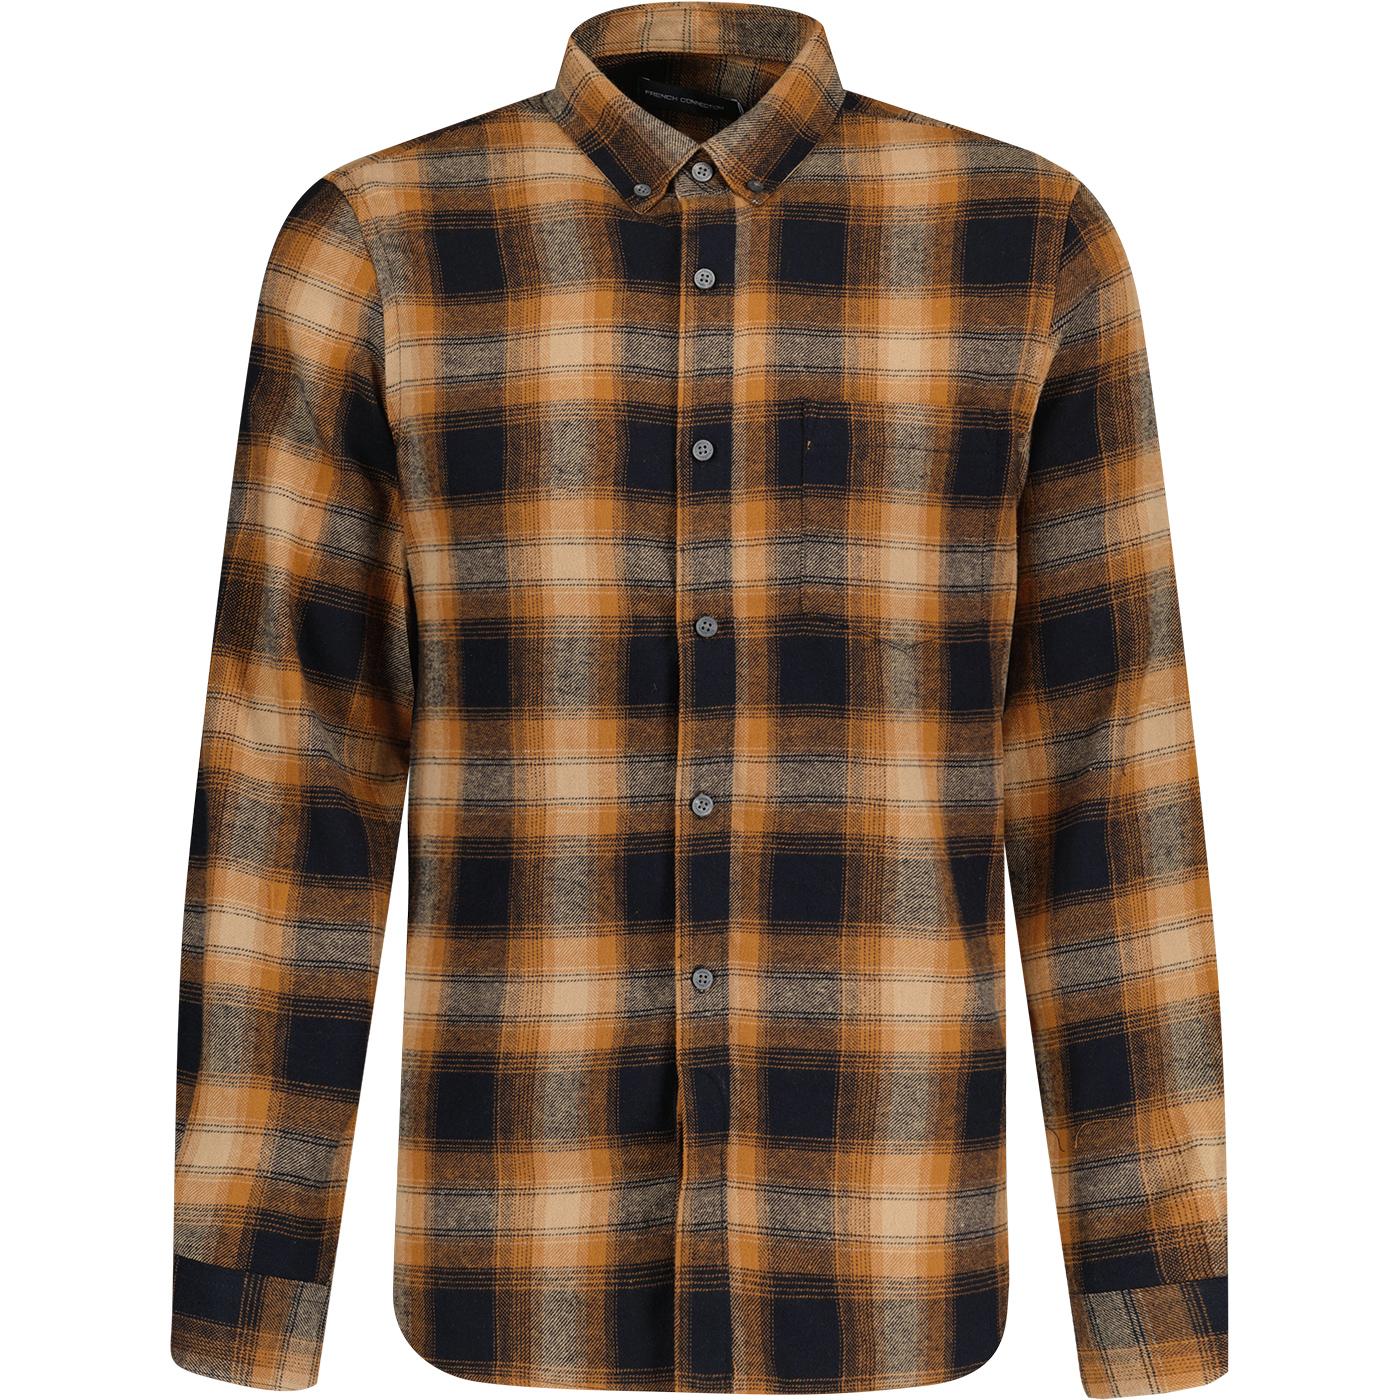 French Connection Retro Checked Flannel Shirt R